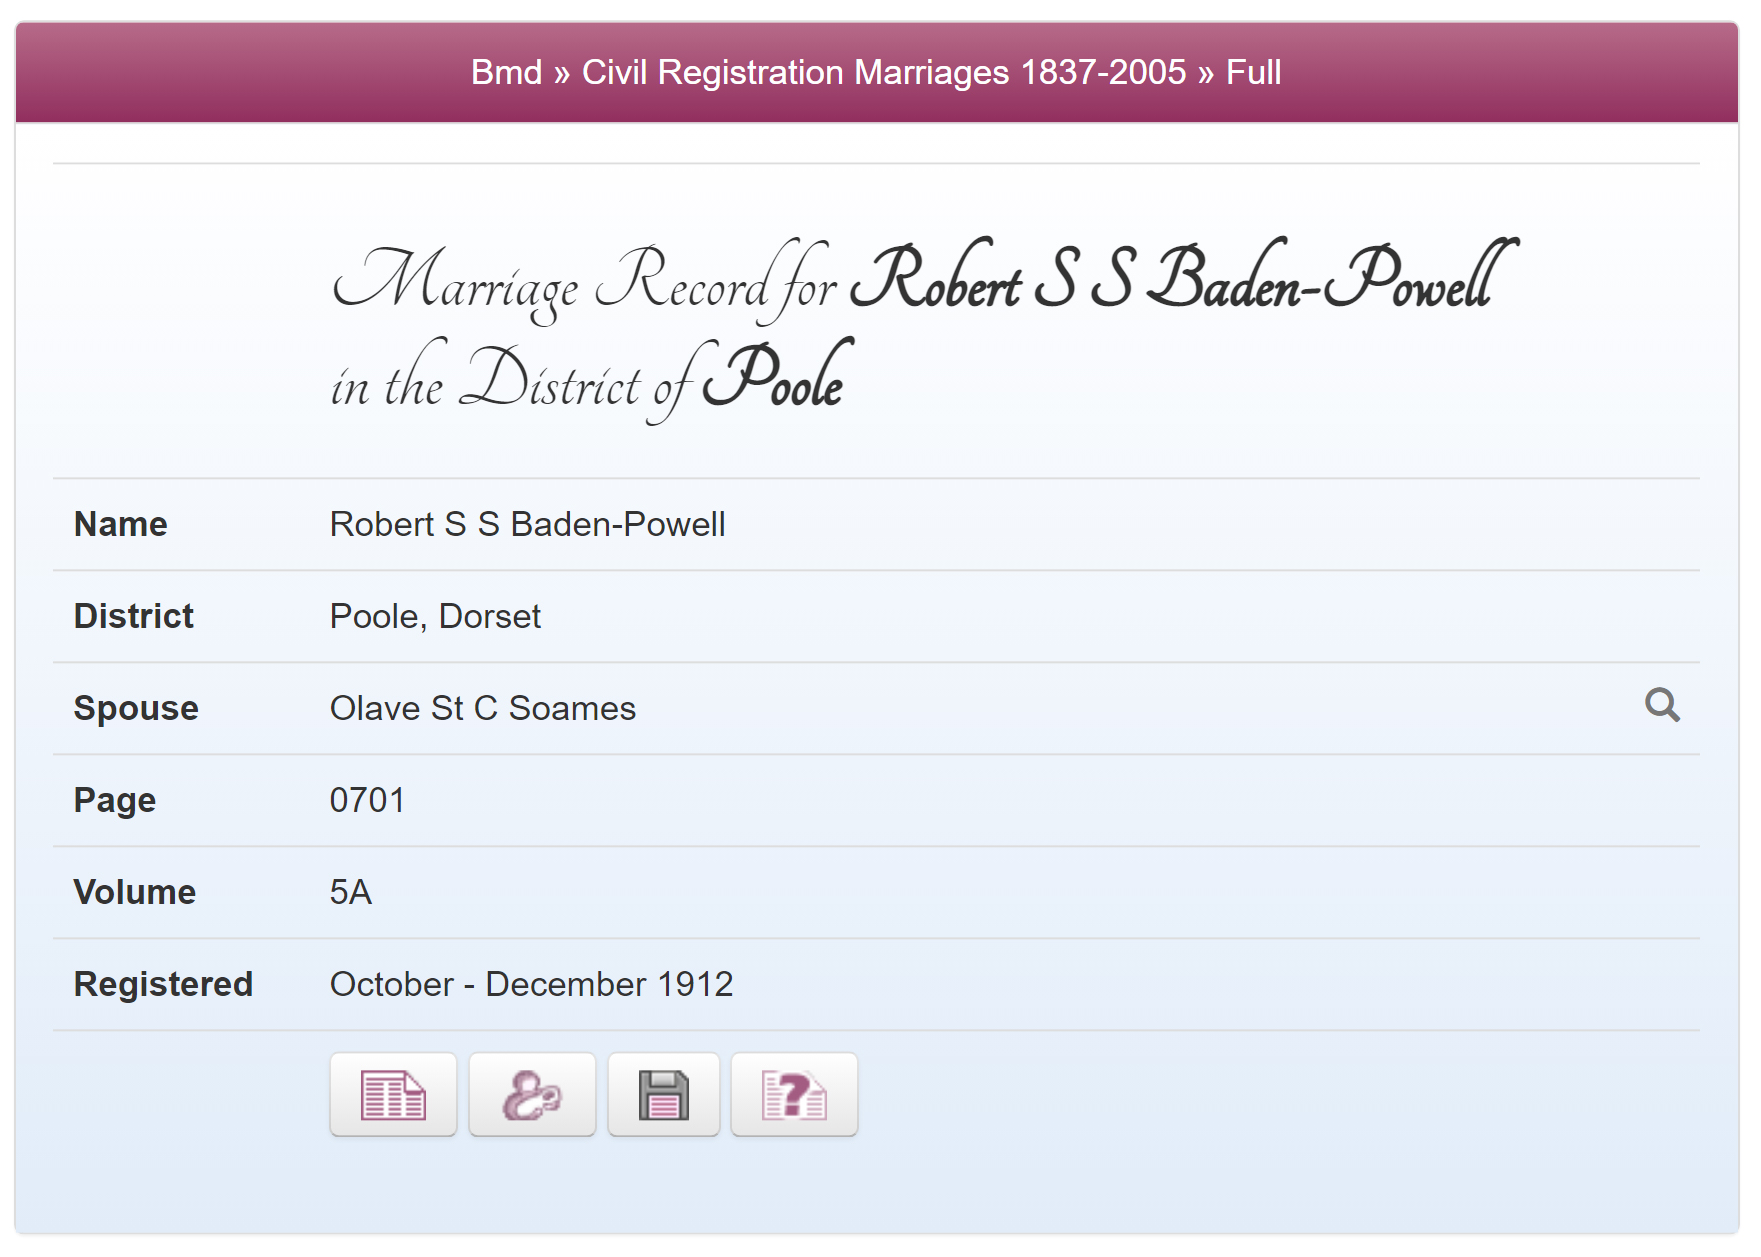 Baden-Powell's marriage record